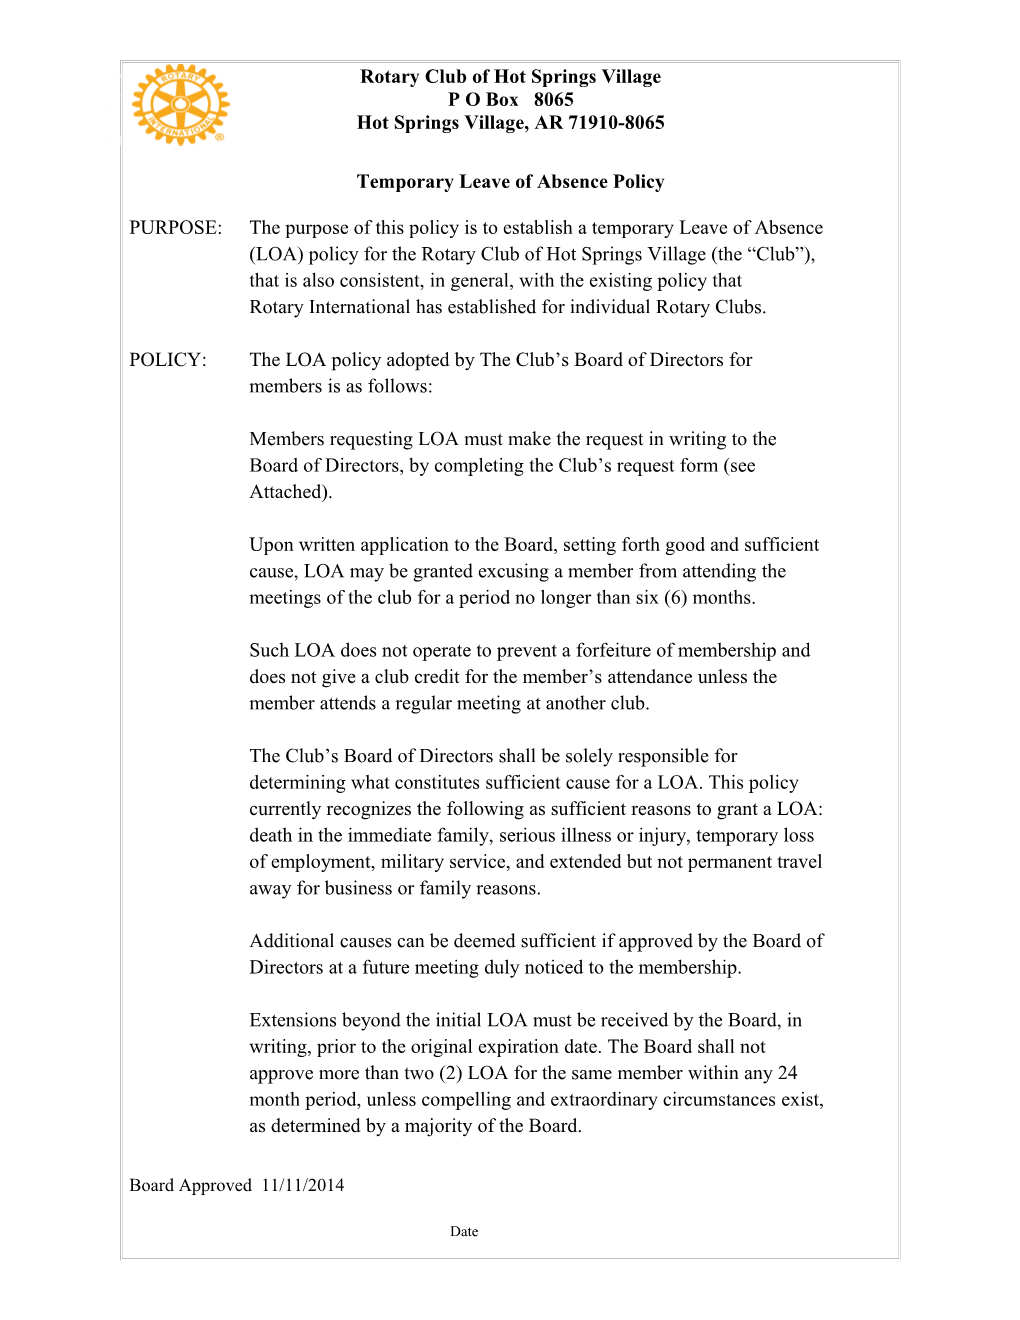 Temporary Leave of Absence Policy